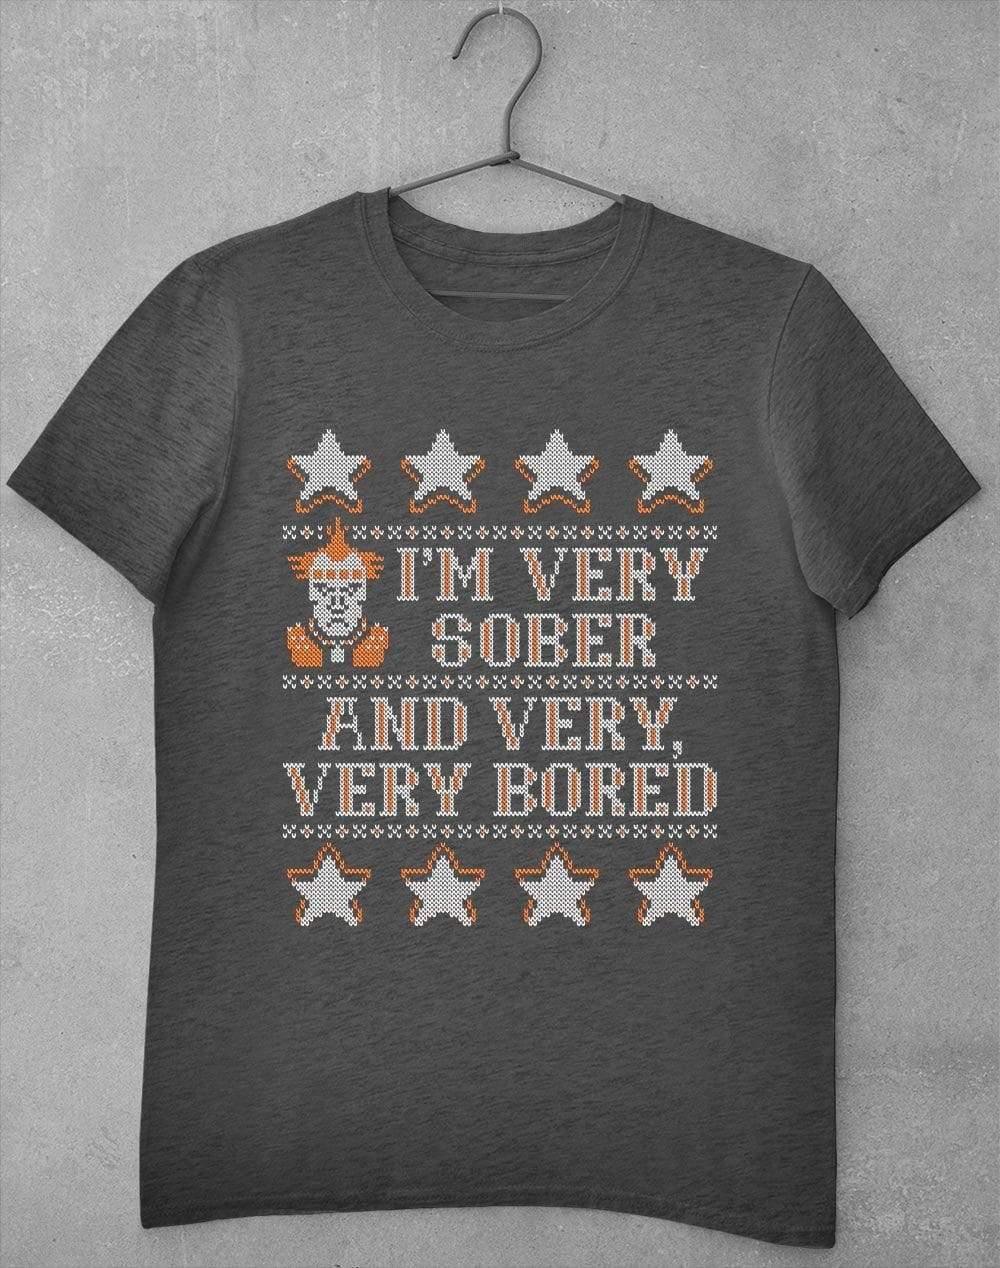 I'm Very Sober and Very Very Bored Festive Knitted-Look T-Shirt S / Dark Heather  - Off World Tees